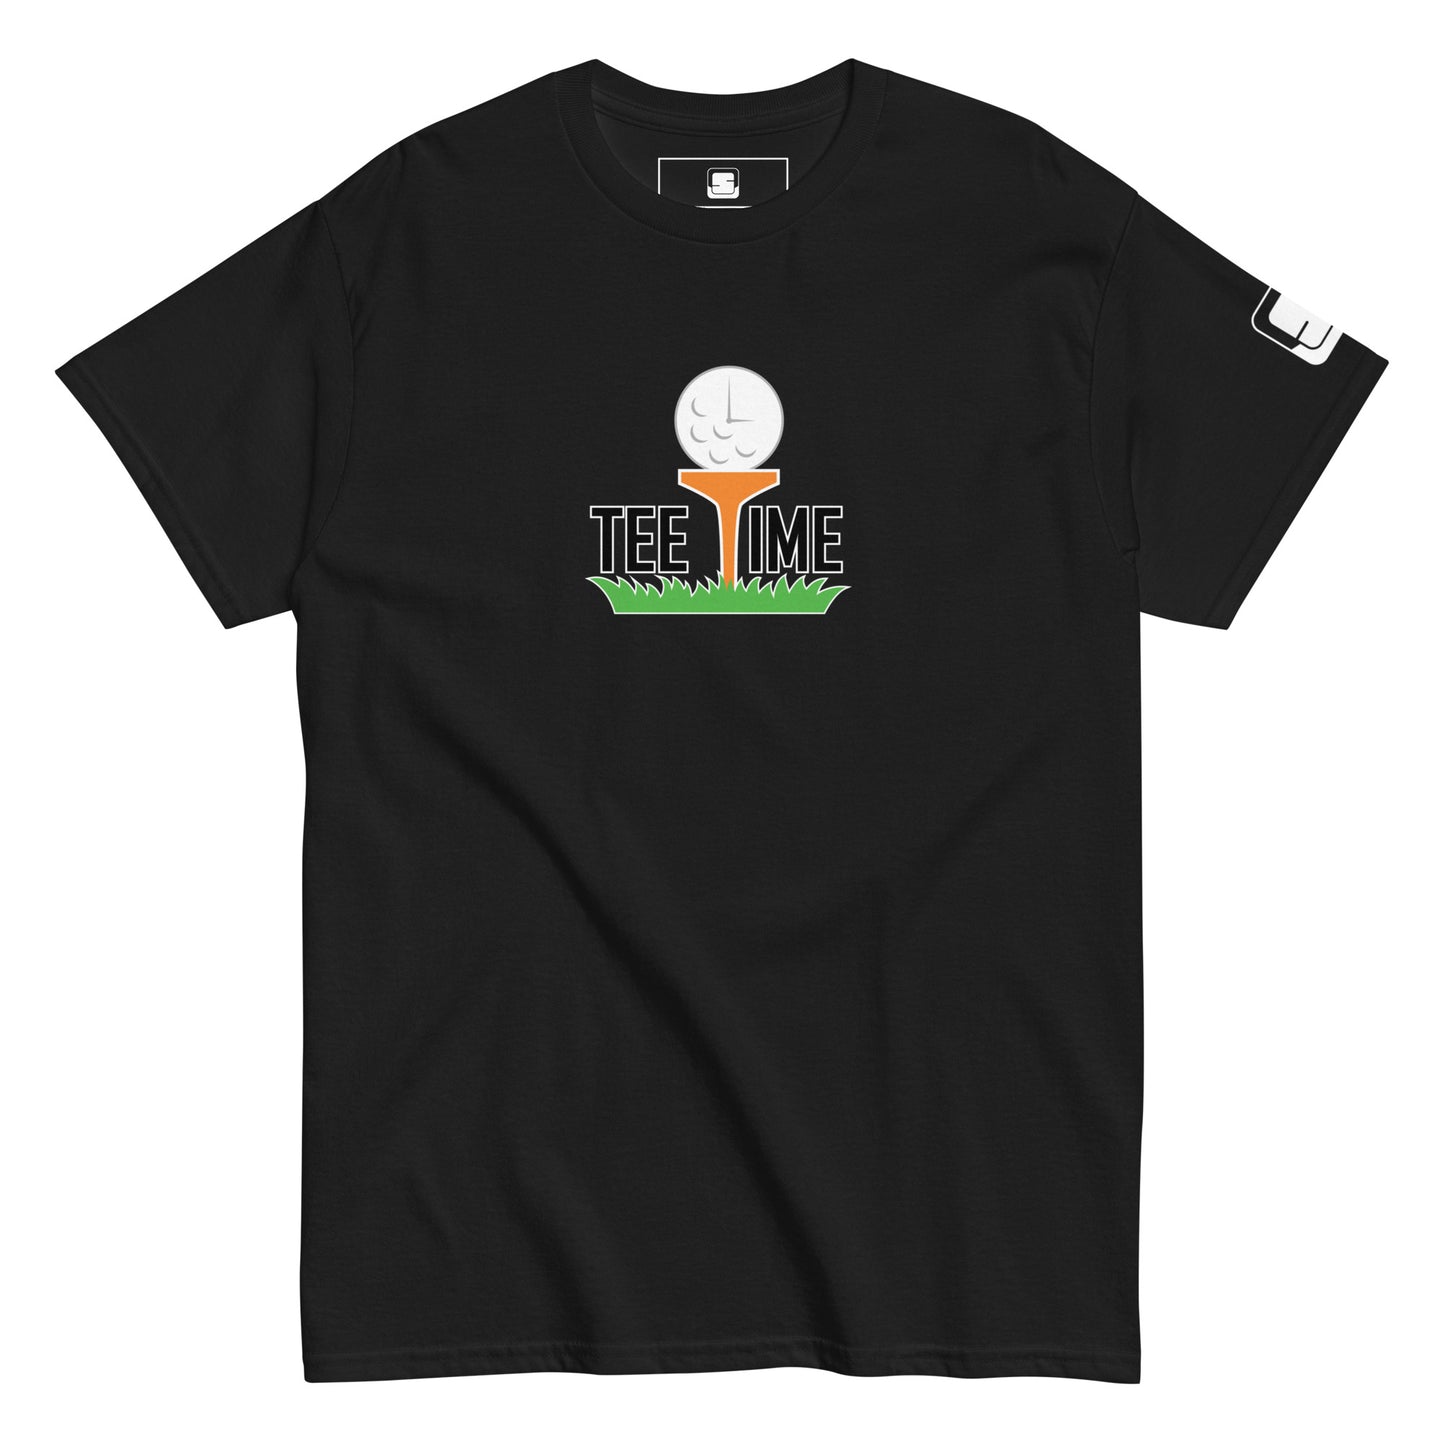 Black short-sleeved t-shirt with a 'Tee Time' graphic showing a golf ball character on grass on the chest and a small logo patch on the sleeve,  against a white background.